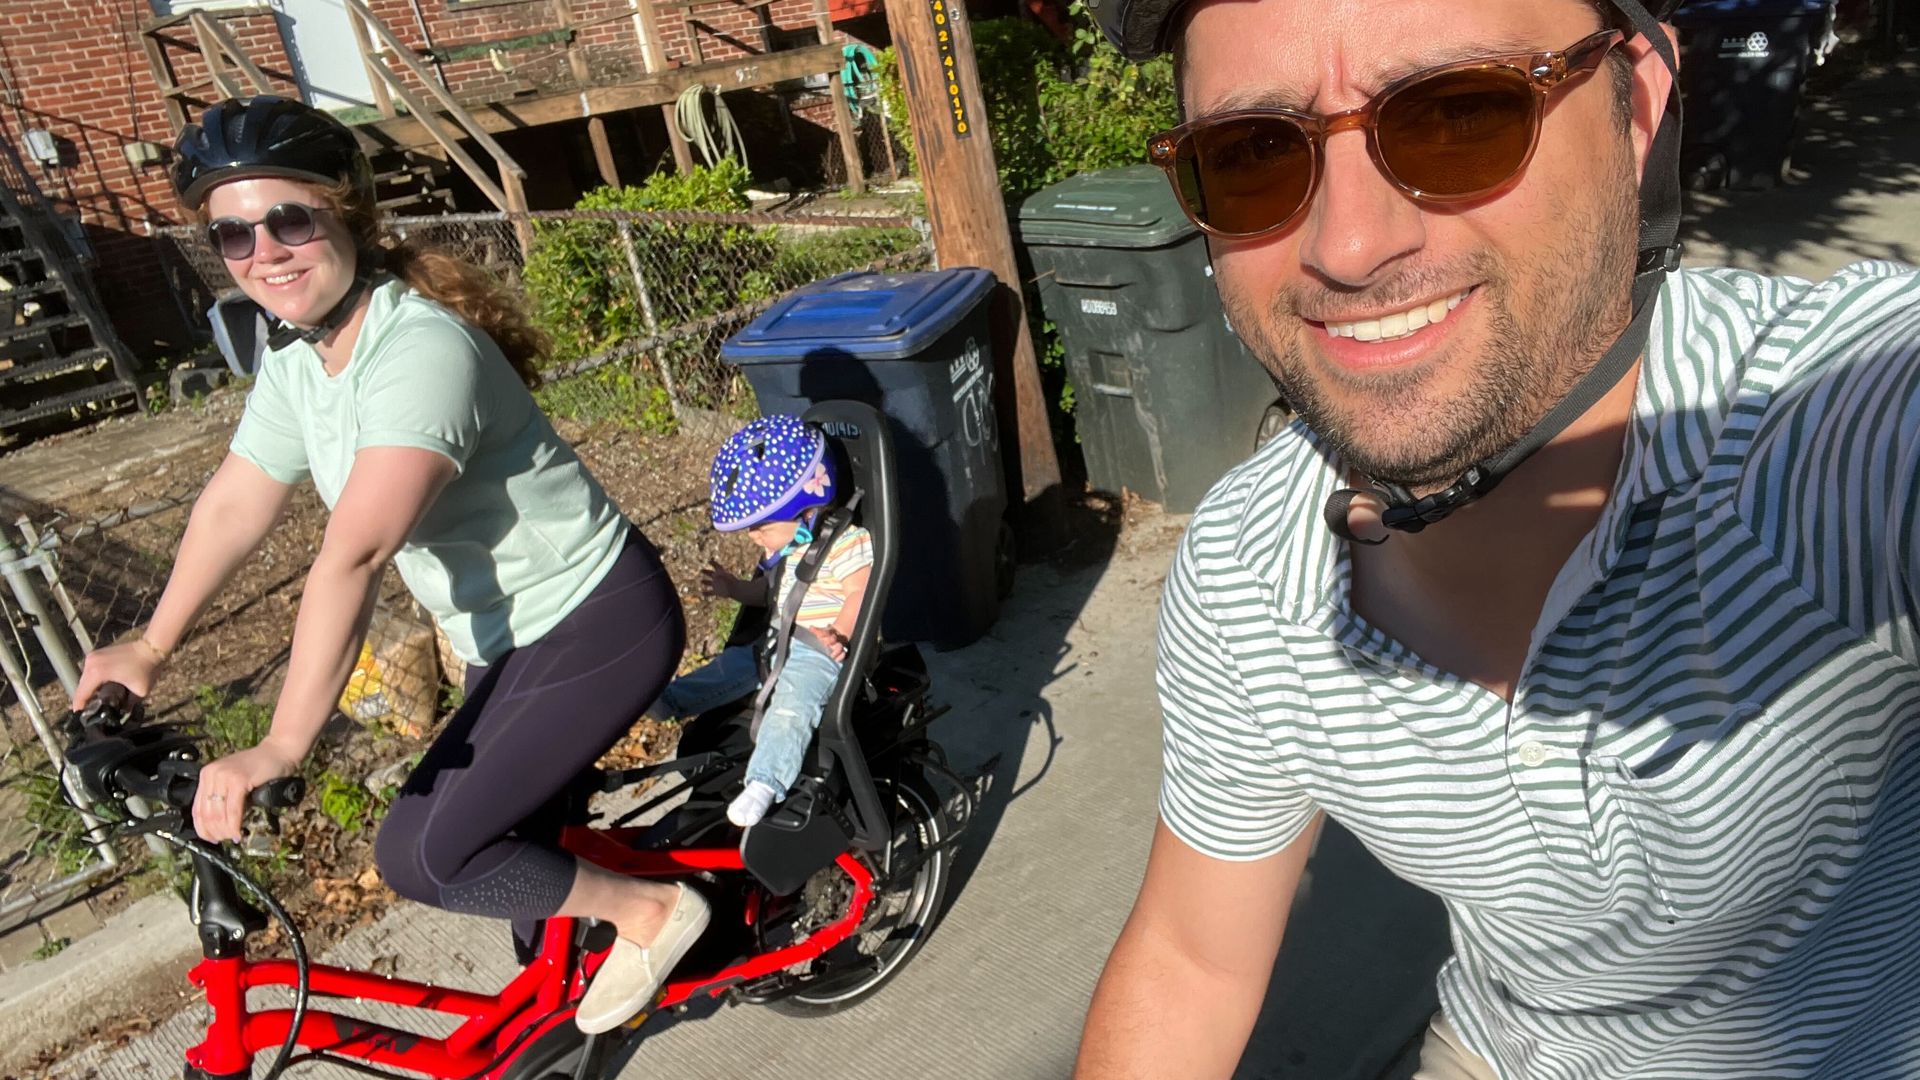 Axios reporter Ashley Gold rides an electric bike with her daughter in tow.